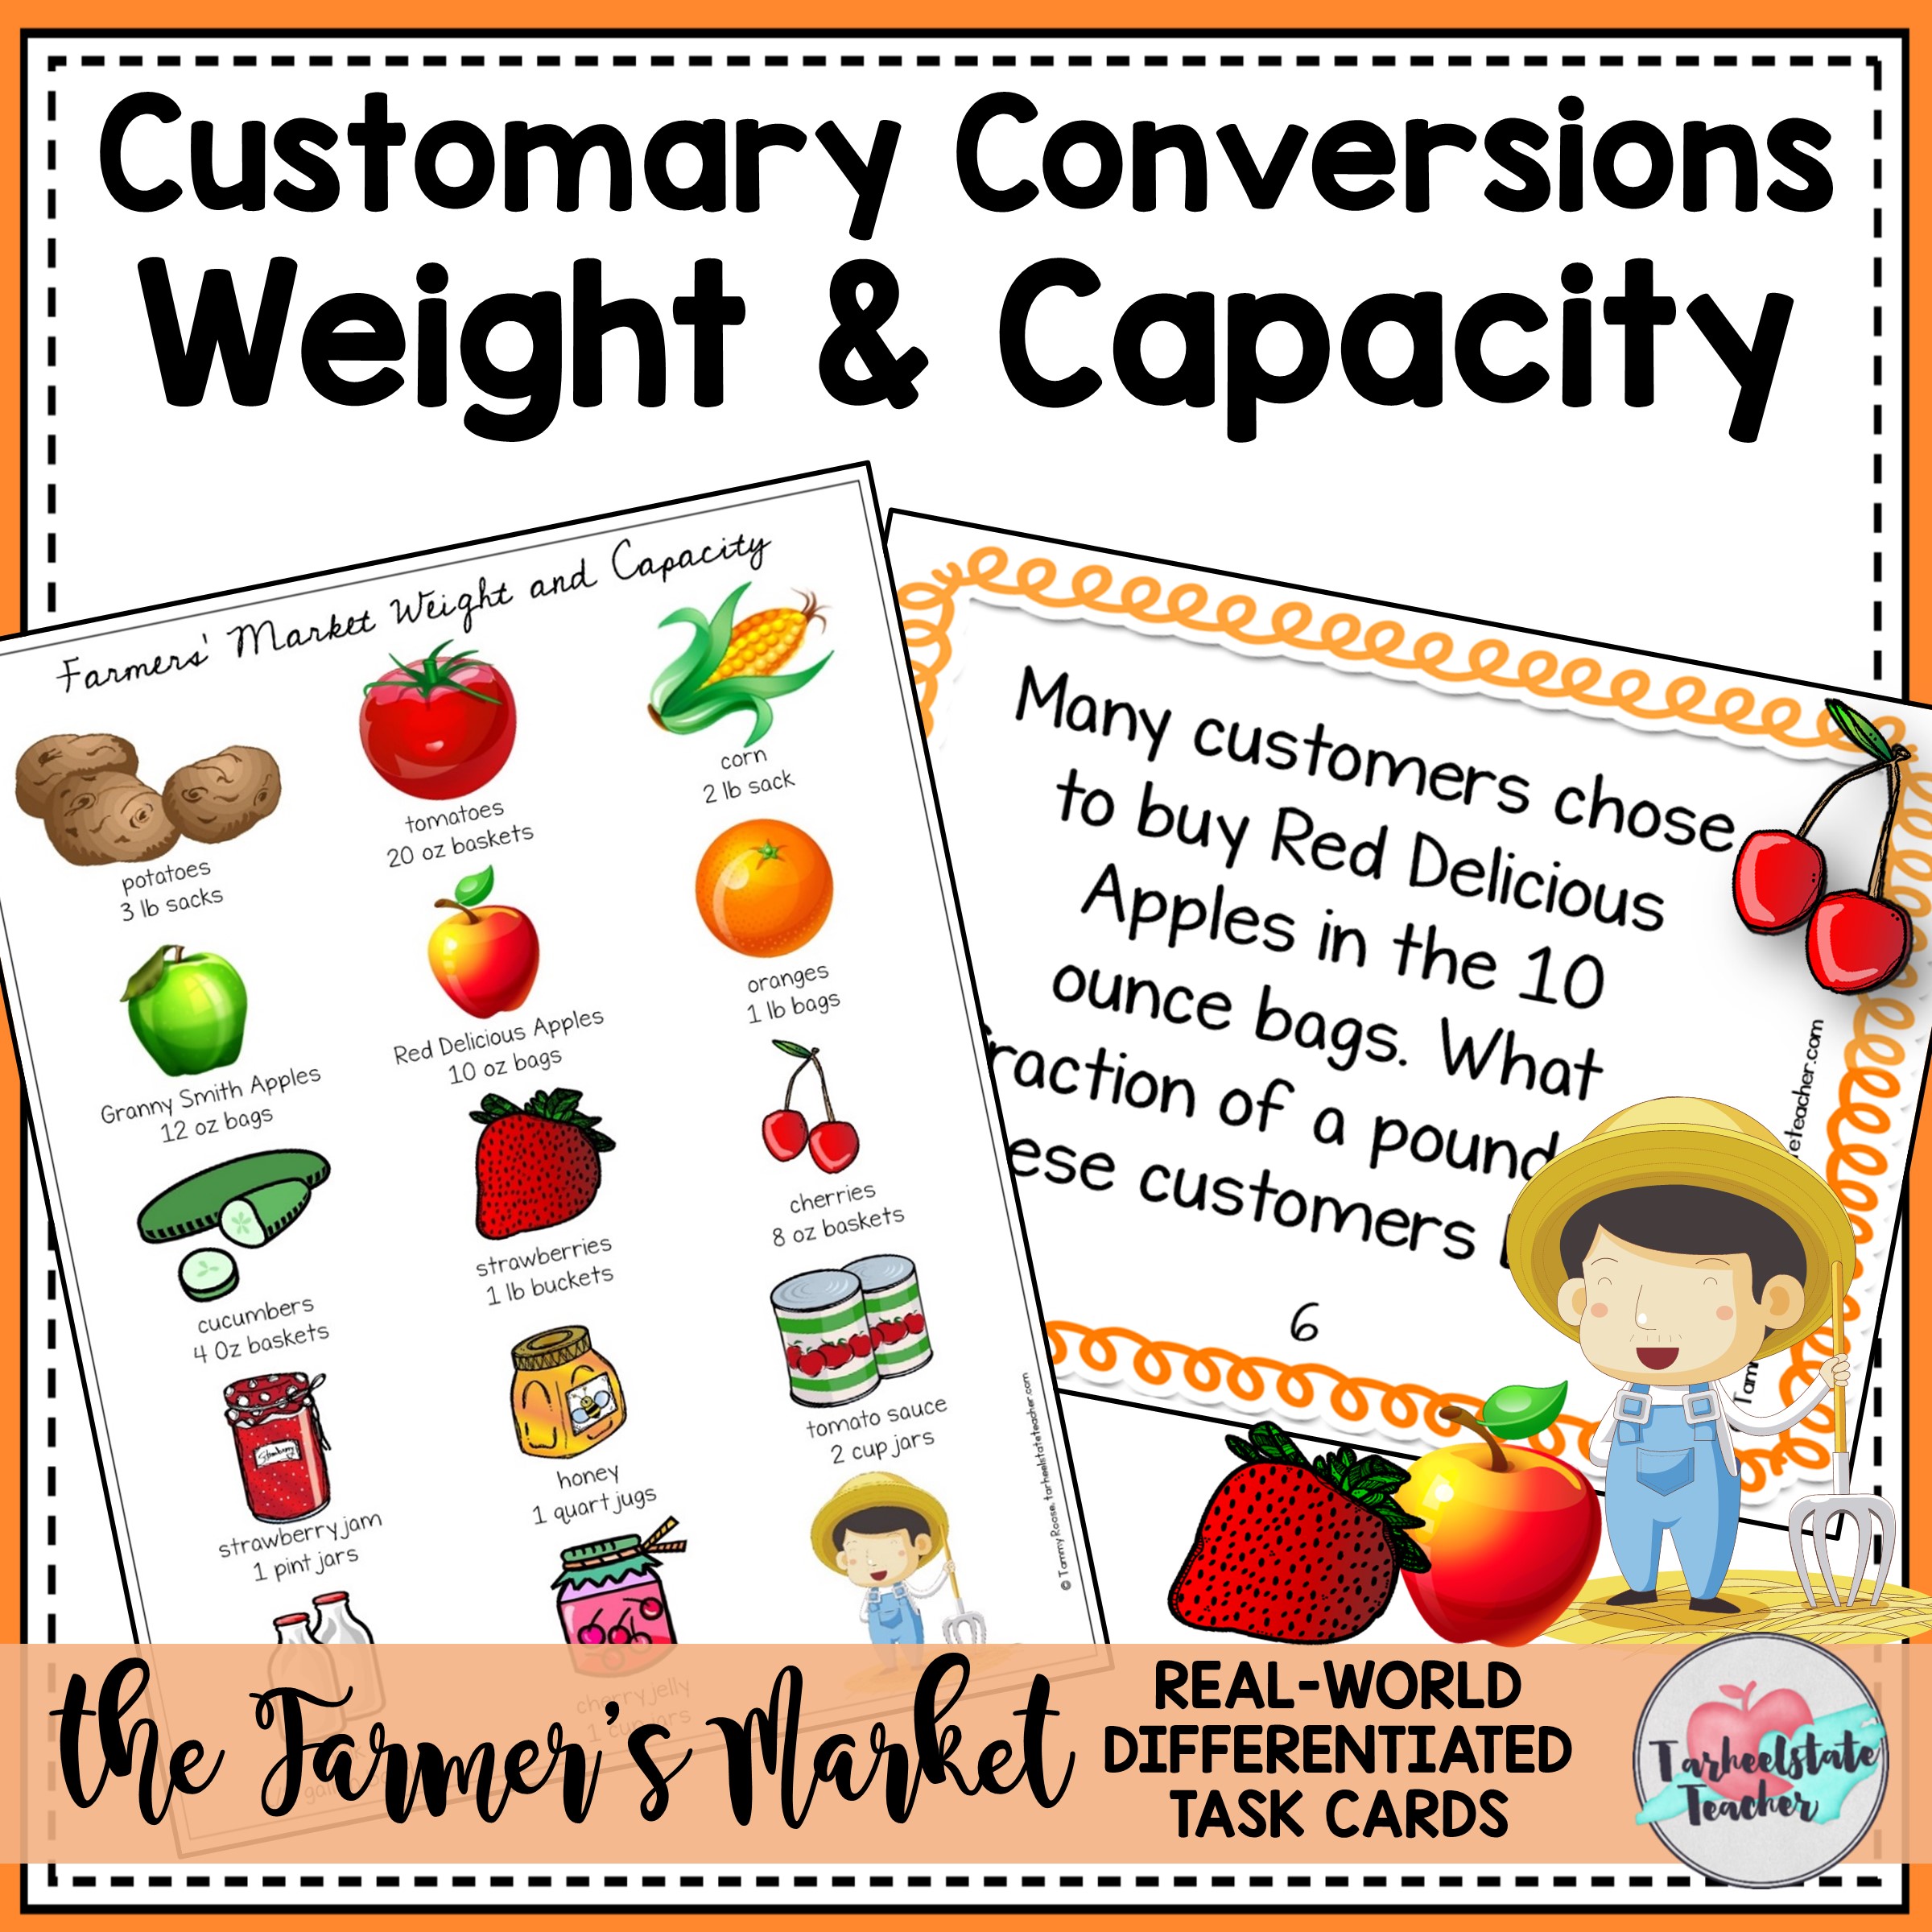 customary capacity weight conversions task cards.jpg